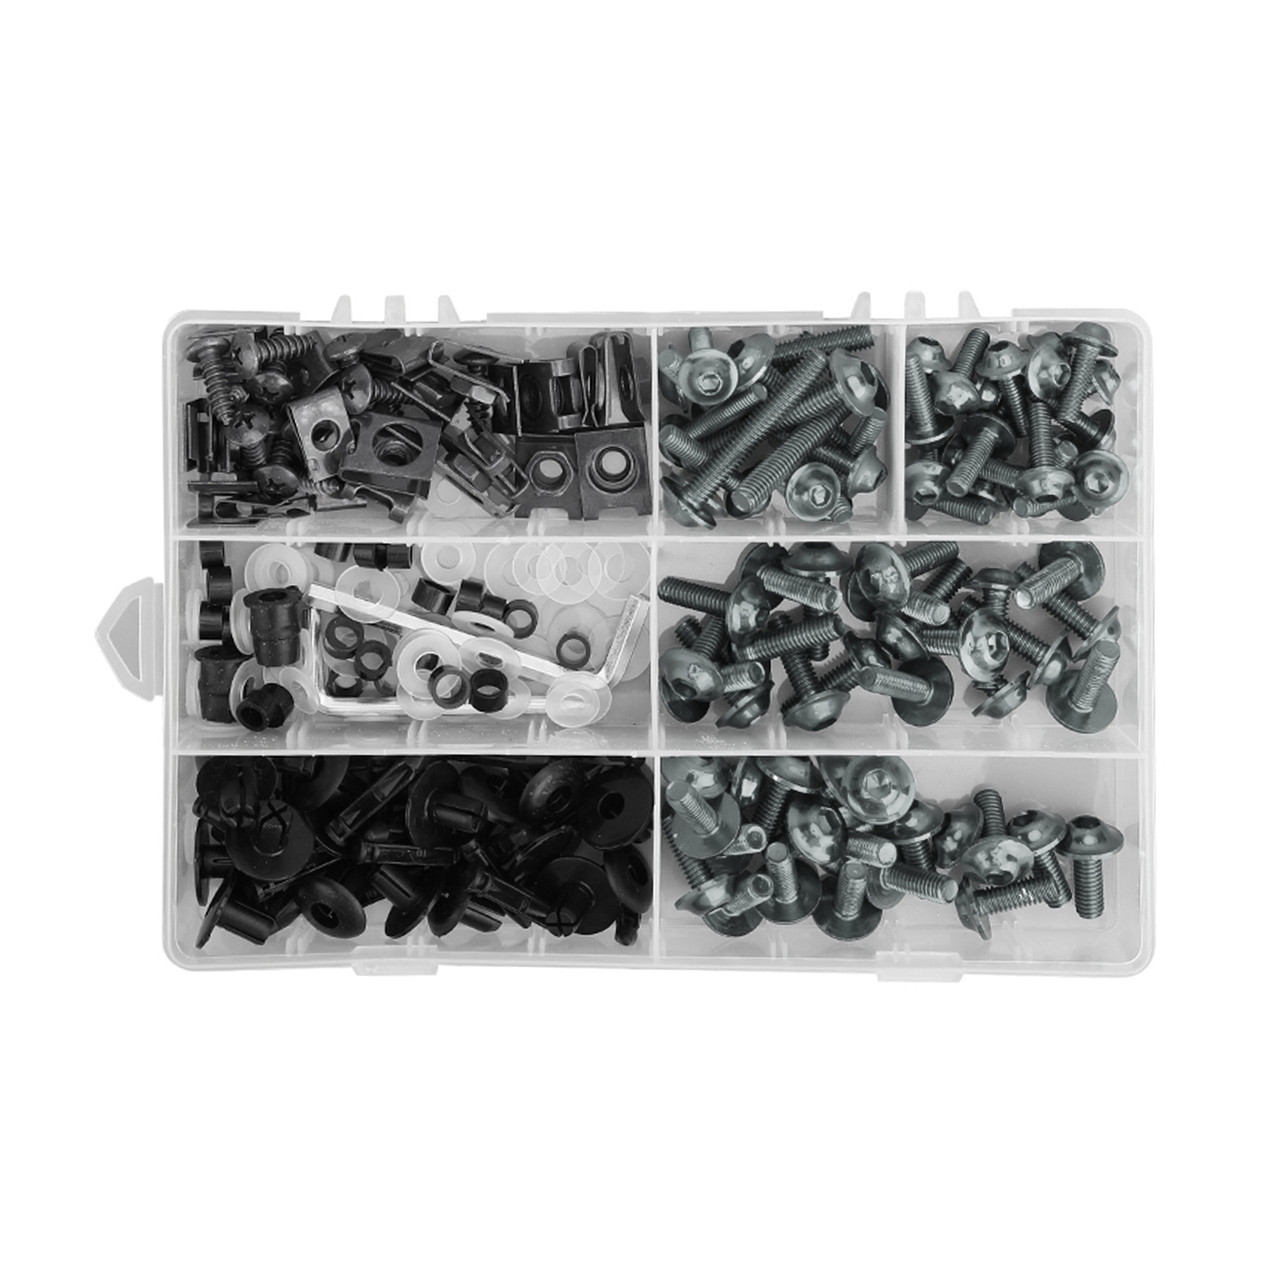 198PCS Motorcycle Sportbike Windscreen Fairing Bolts Kit Fastener Clips Screws For Kawasaki Concours 14 ZG1400A ABS 2016 TIT~BC3